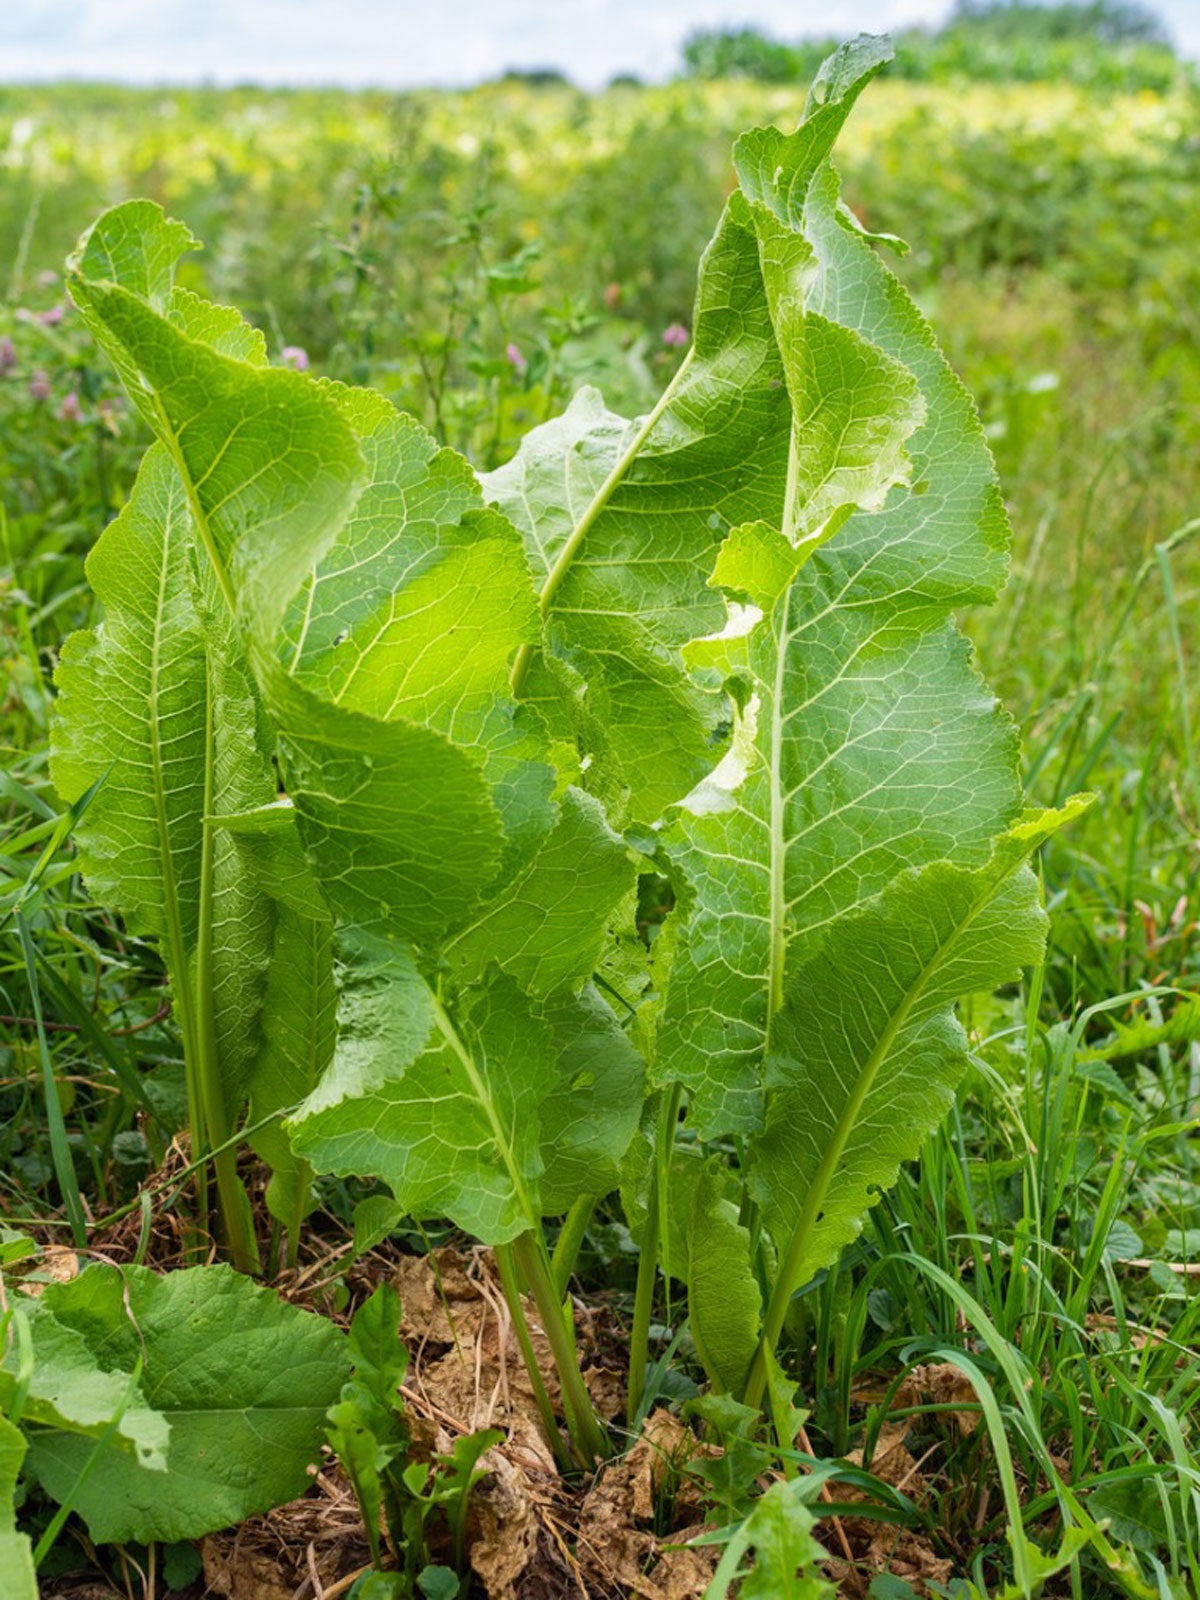 Controlling Horseradish Tips To Get Rid Of Horseradish Plants,Pizza Toppings